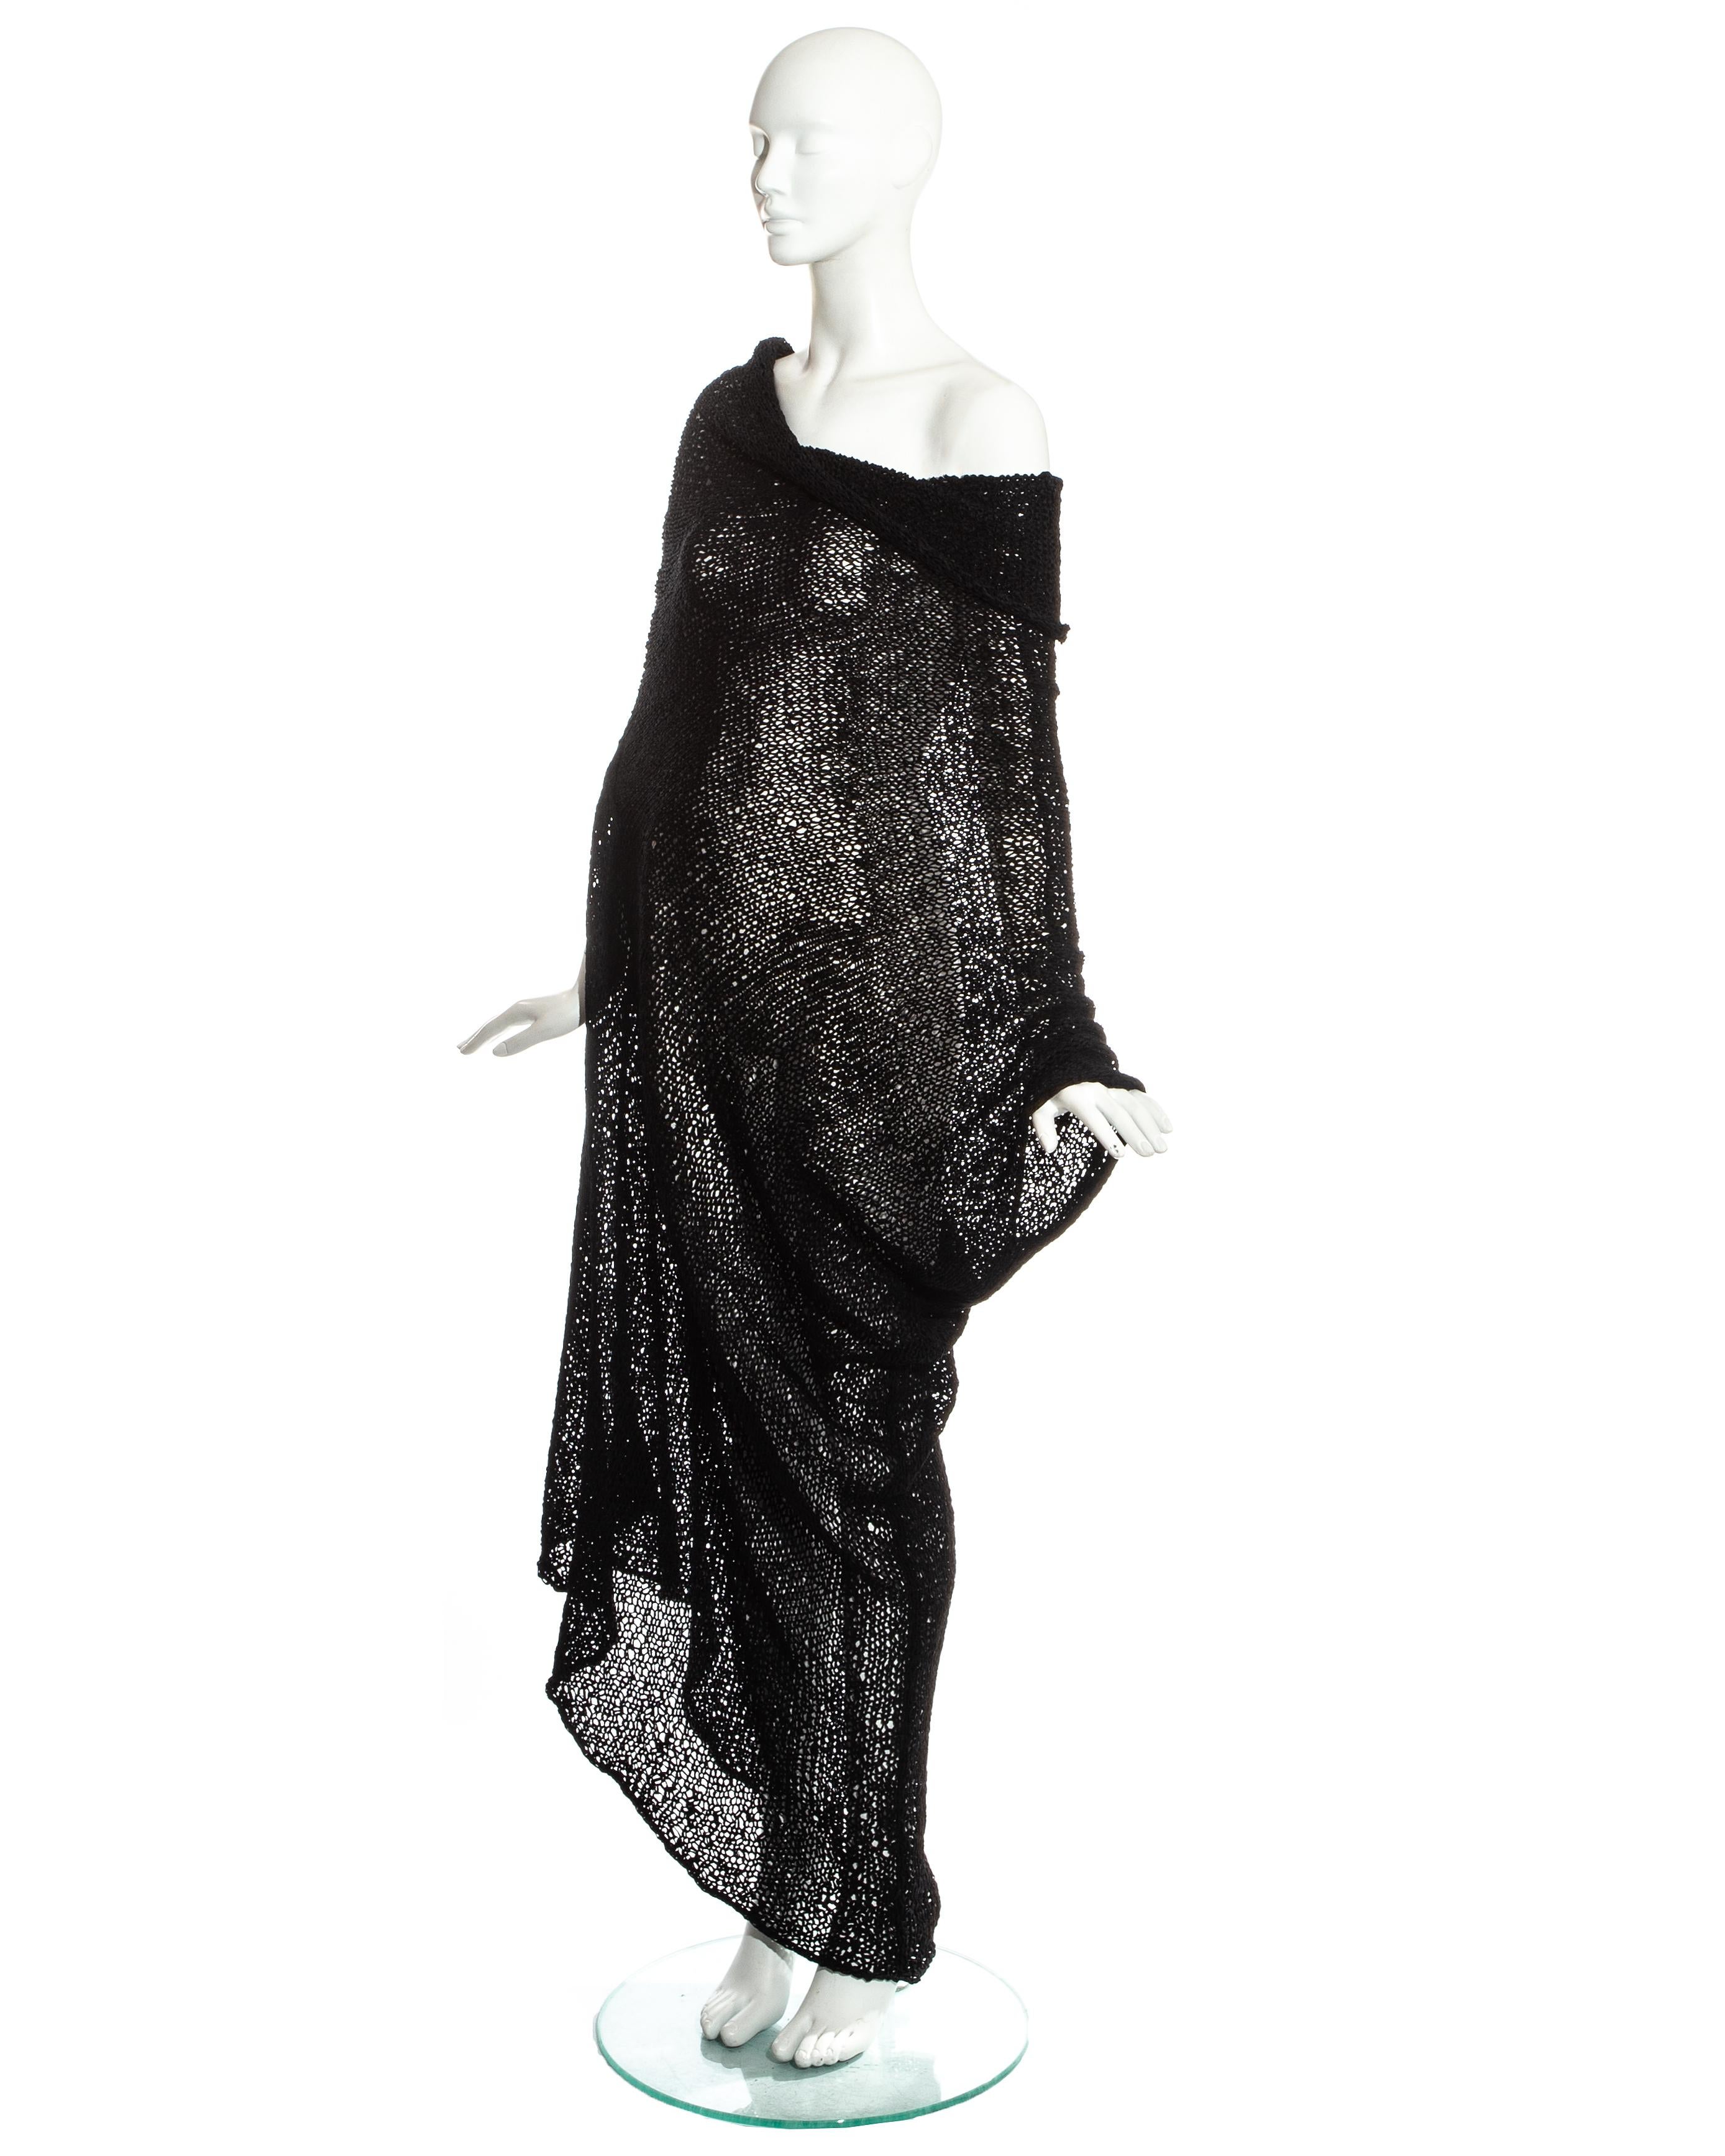 Black Comme des Garcons black knitted raw silk dress, ss 1984